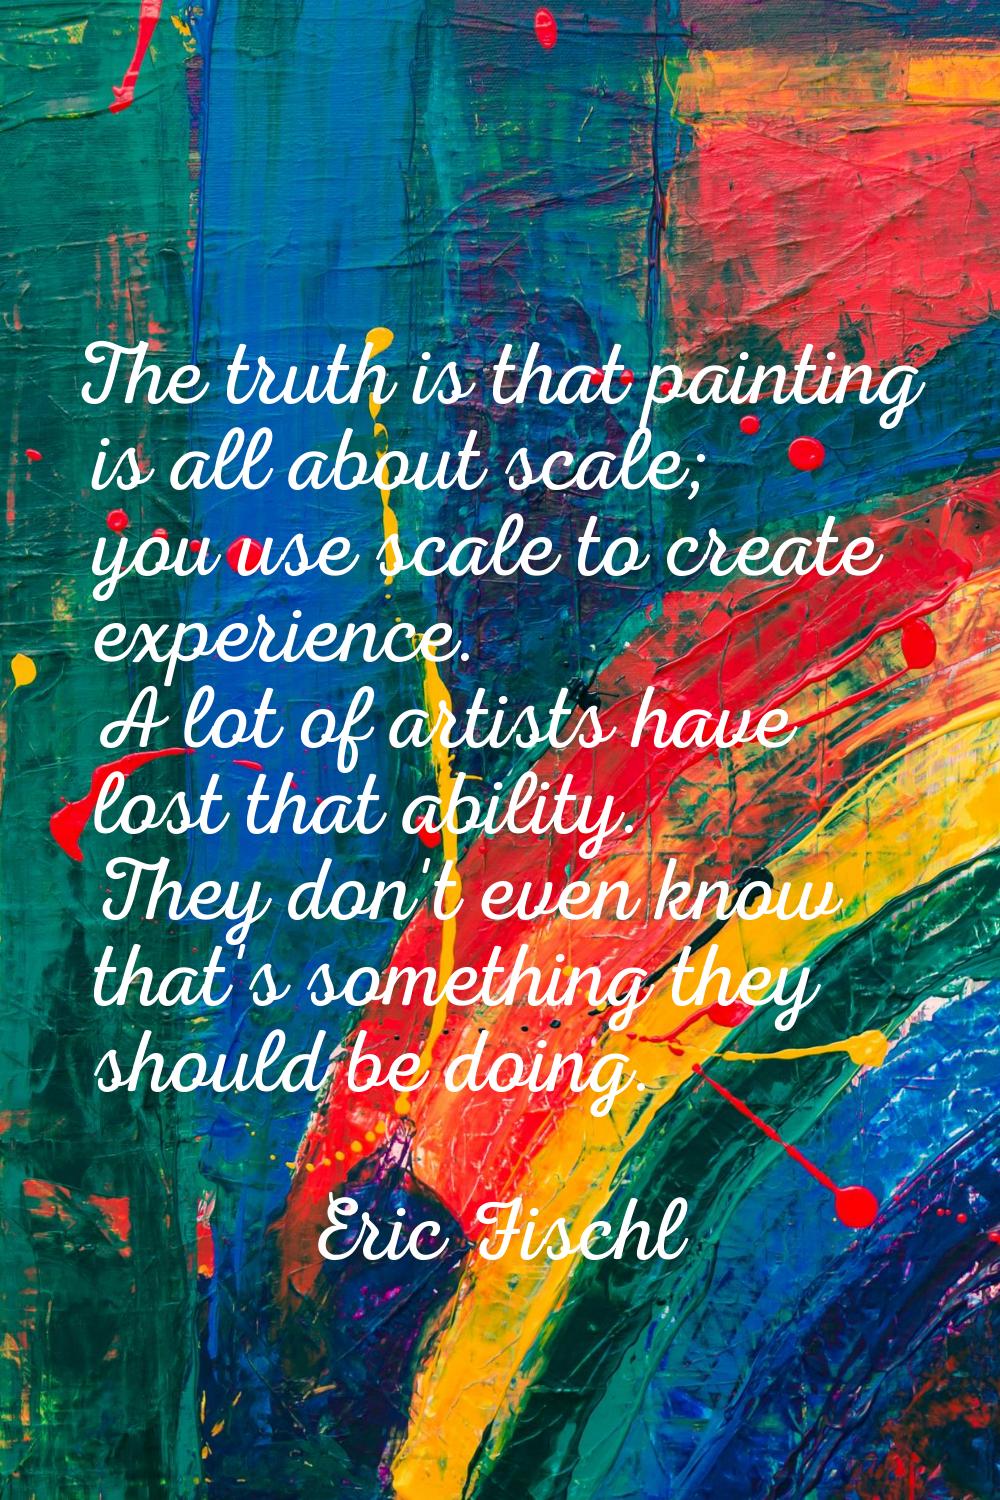 The truth is that painting is all about scale; you use scale to create experience. A lot of artists